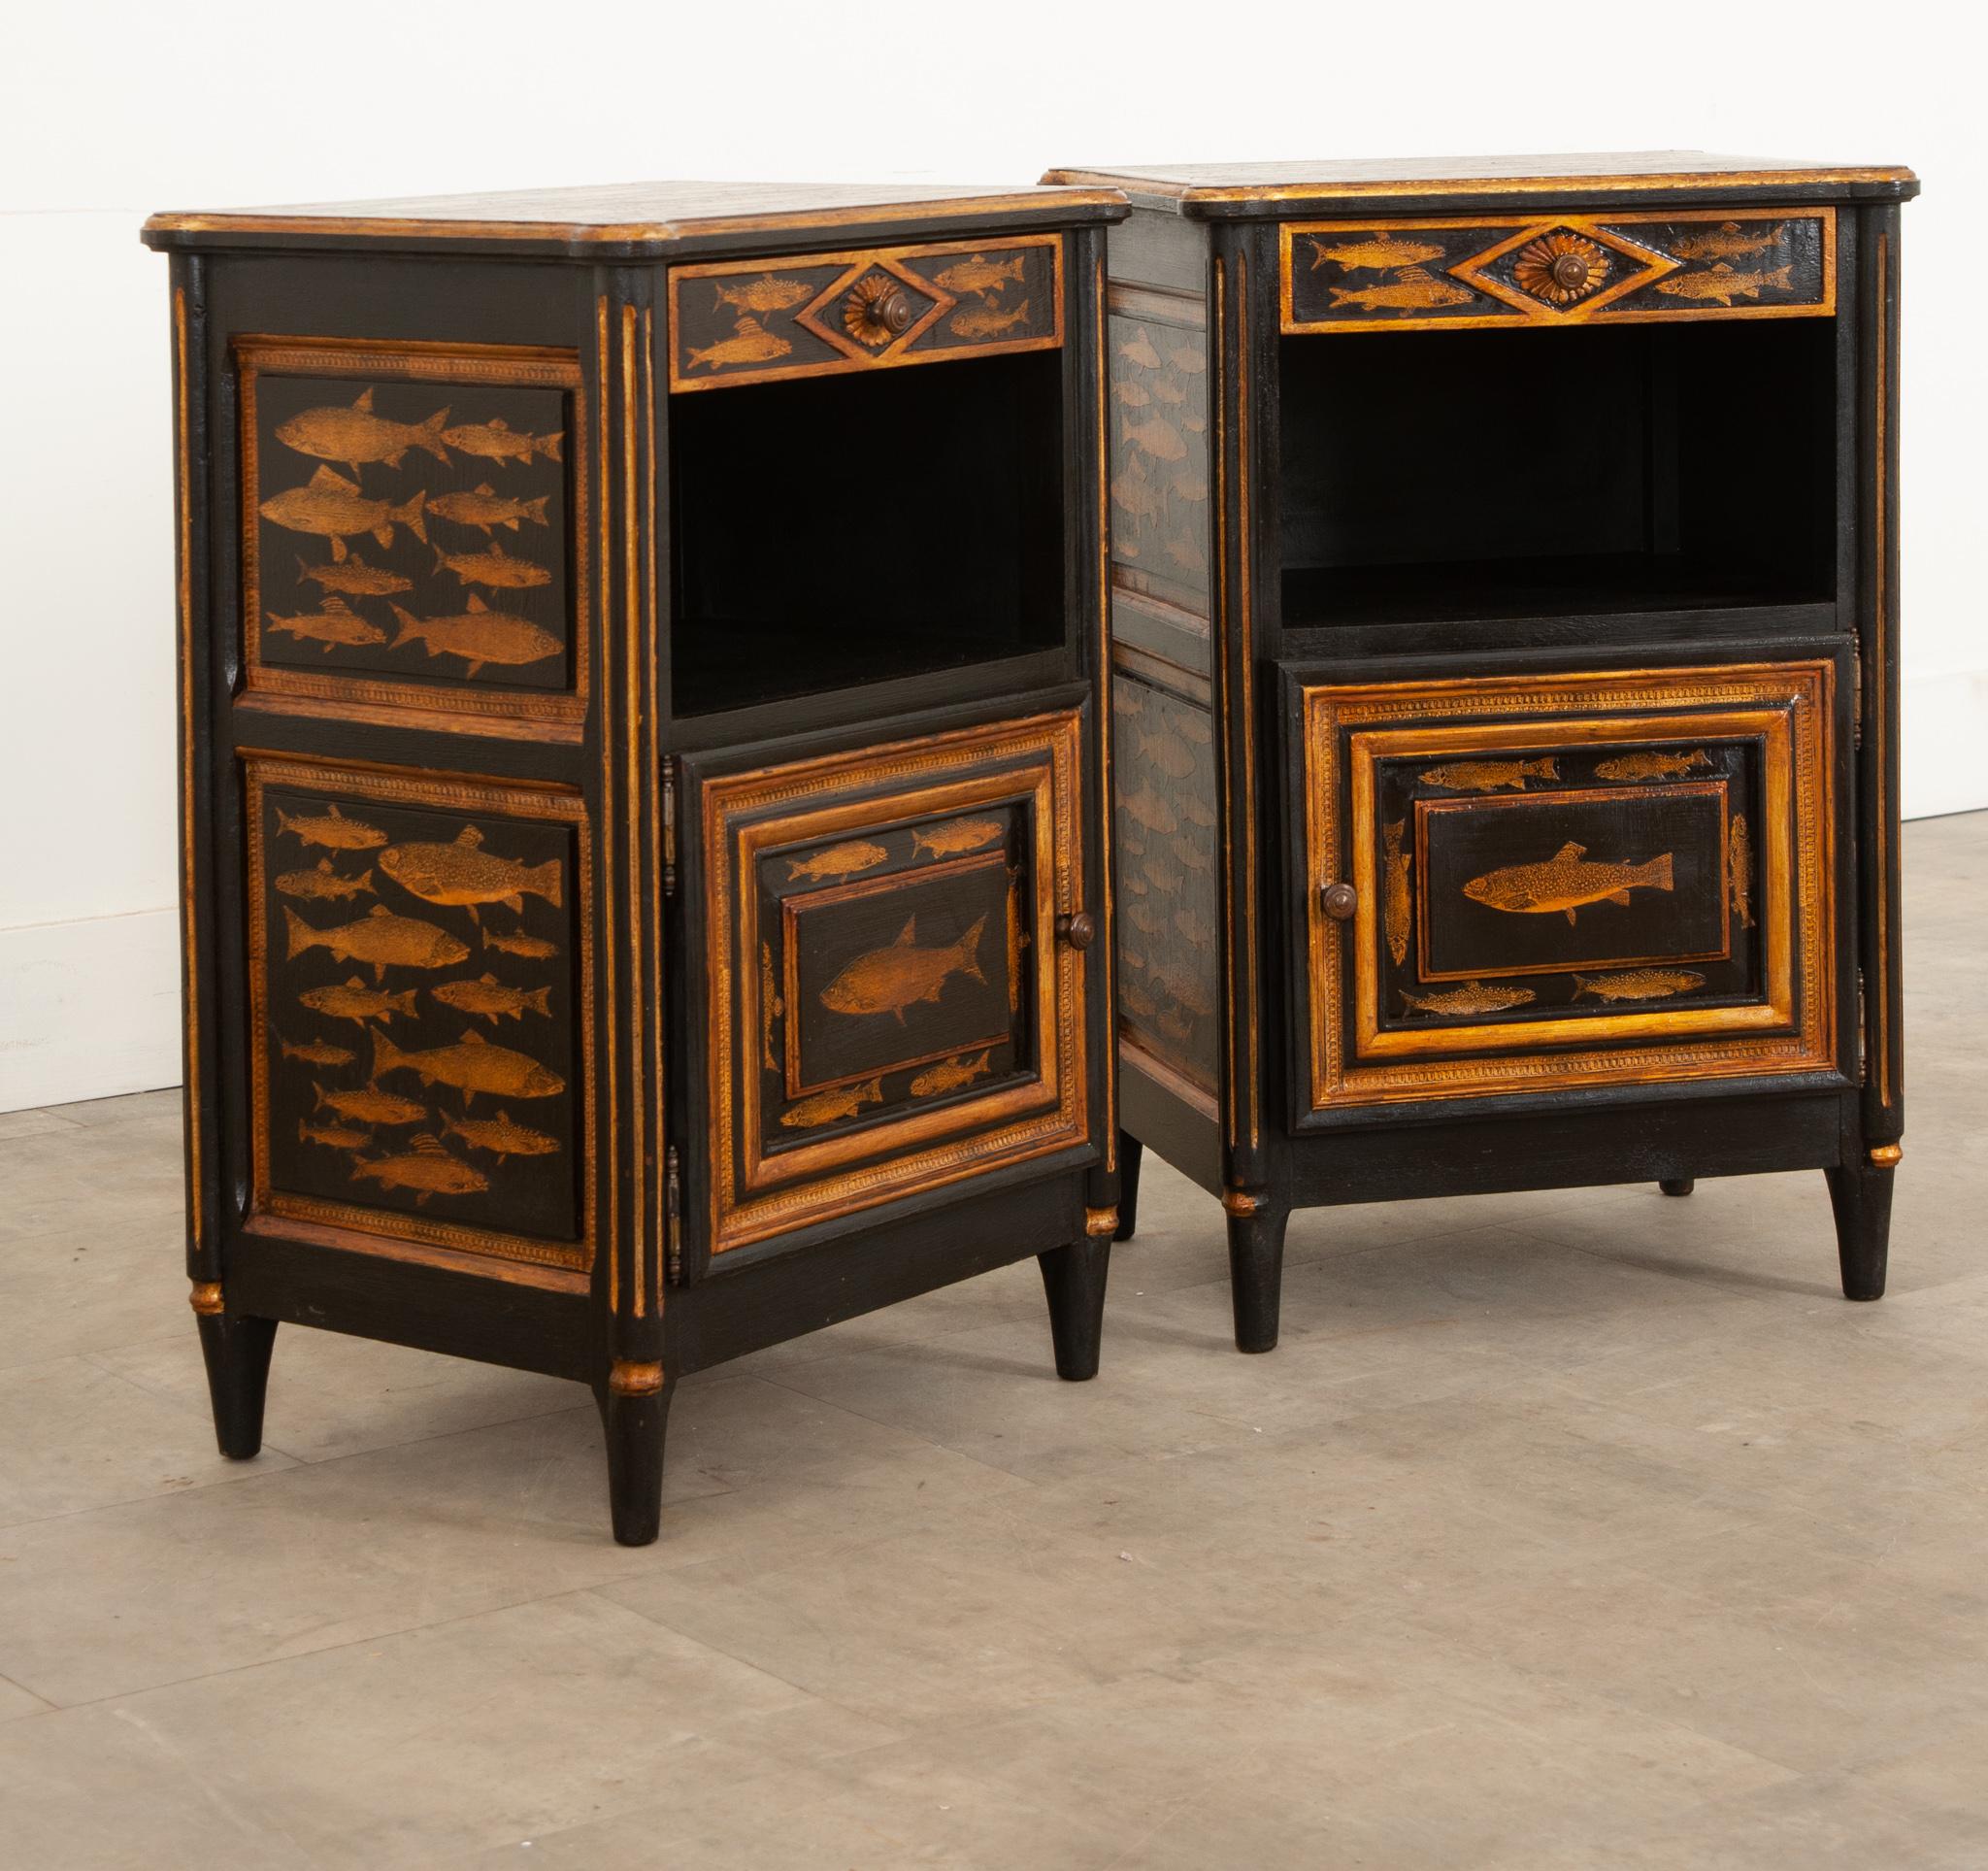 A fanciful set of two antique pine bedside cabinets that date circa 1890 that have been recently painted black with a fish decoupage design. These cabinets will add a whimsical flair to any room in your house, especially a bedroom as there is plenty